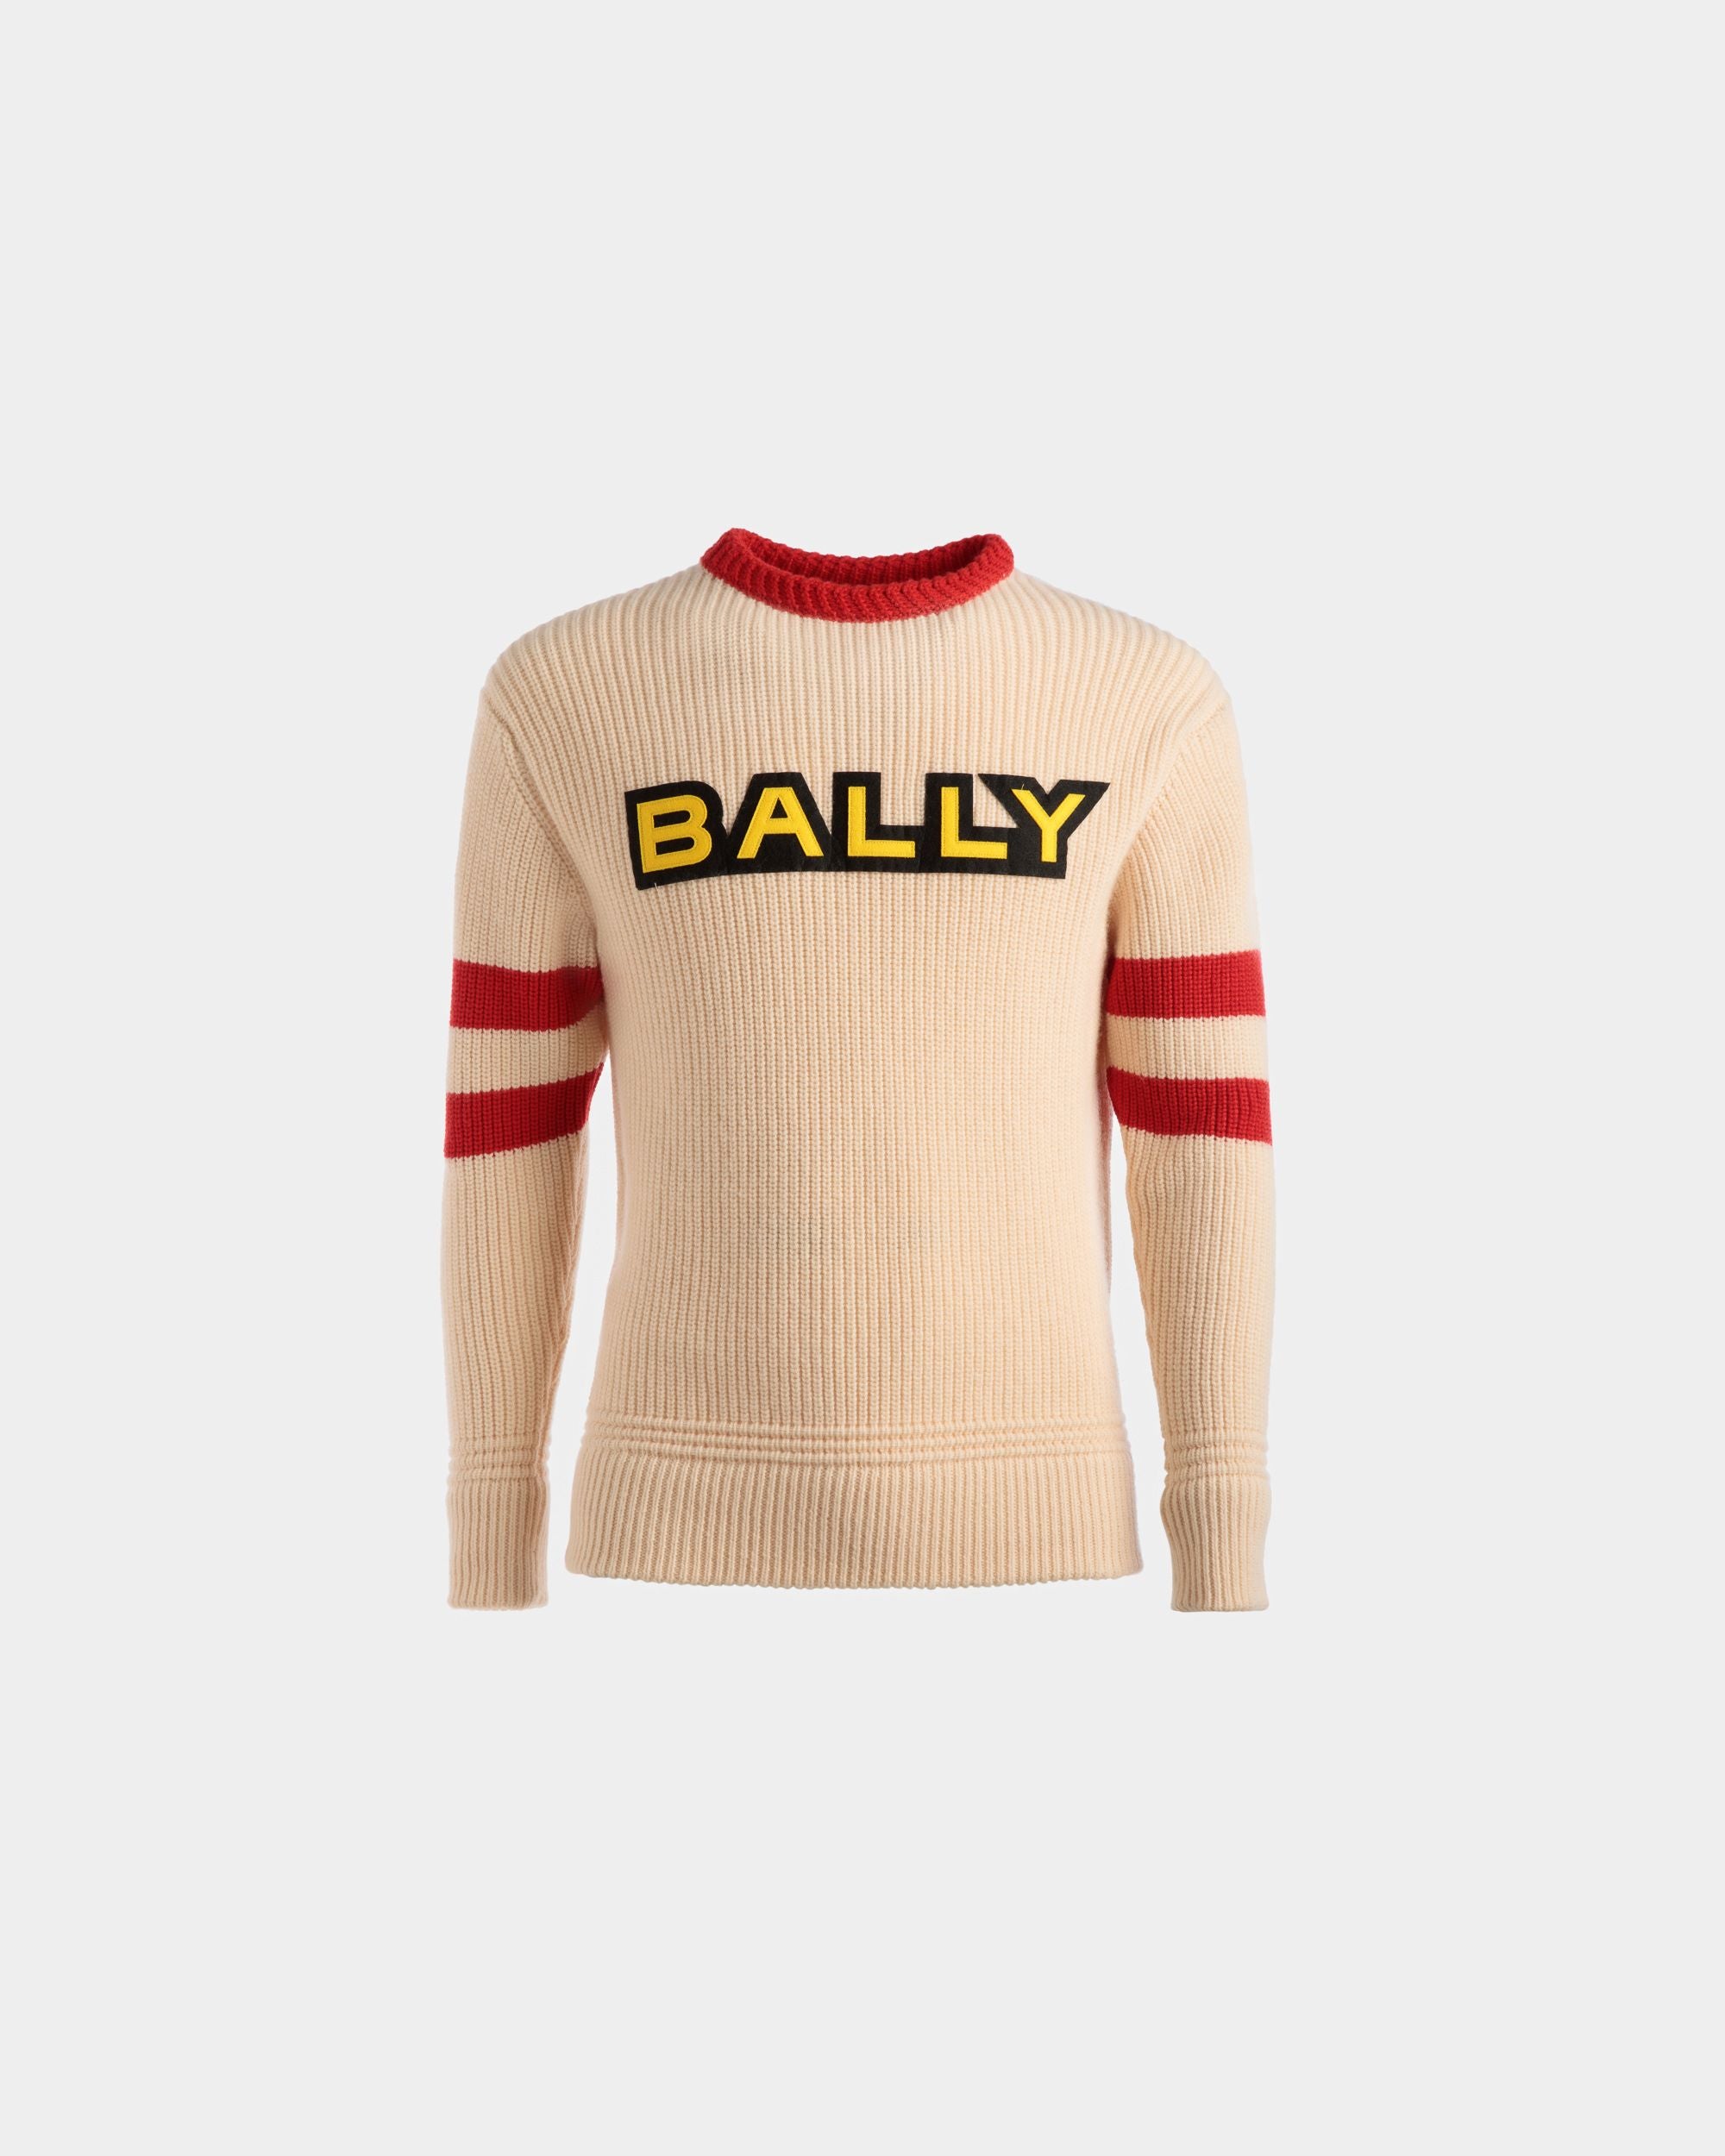 Men's Crew Neck Sweater In Bone and Red Wool | Bally | Still Life Front